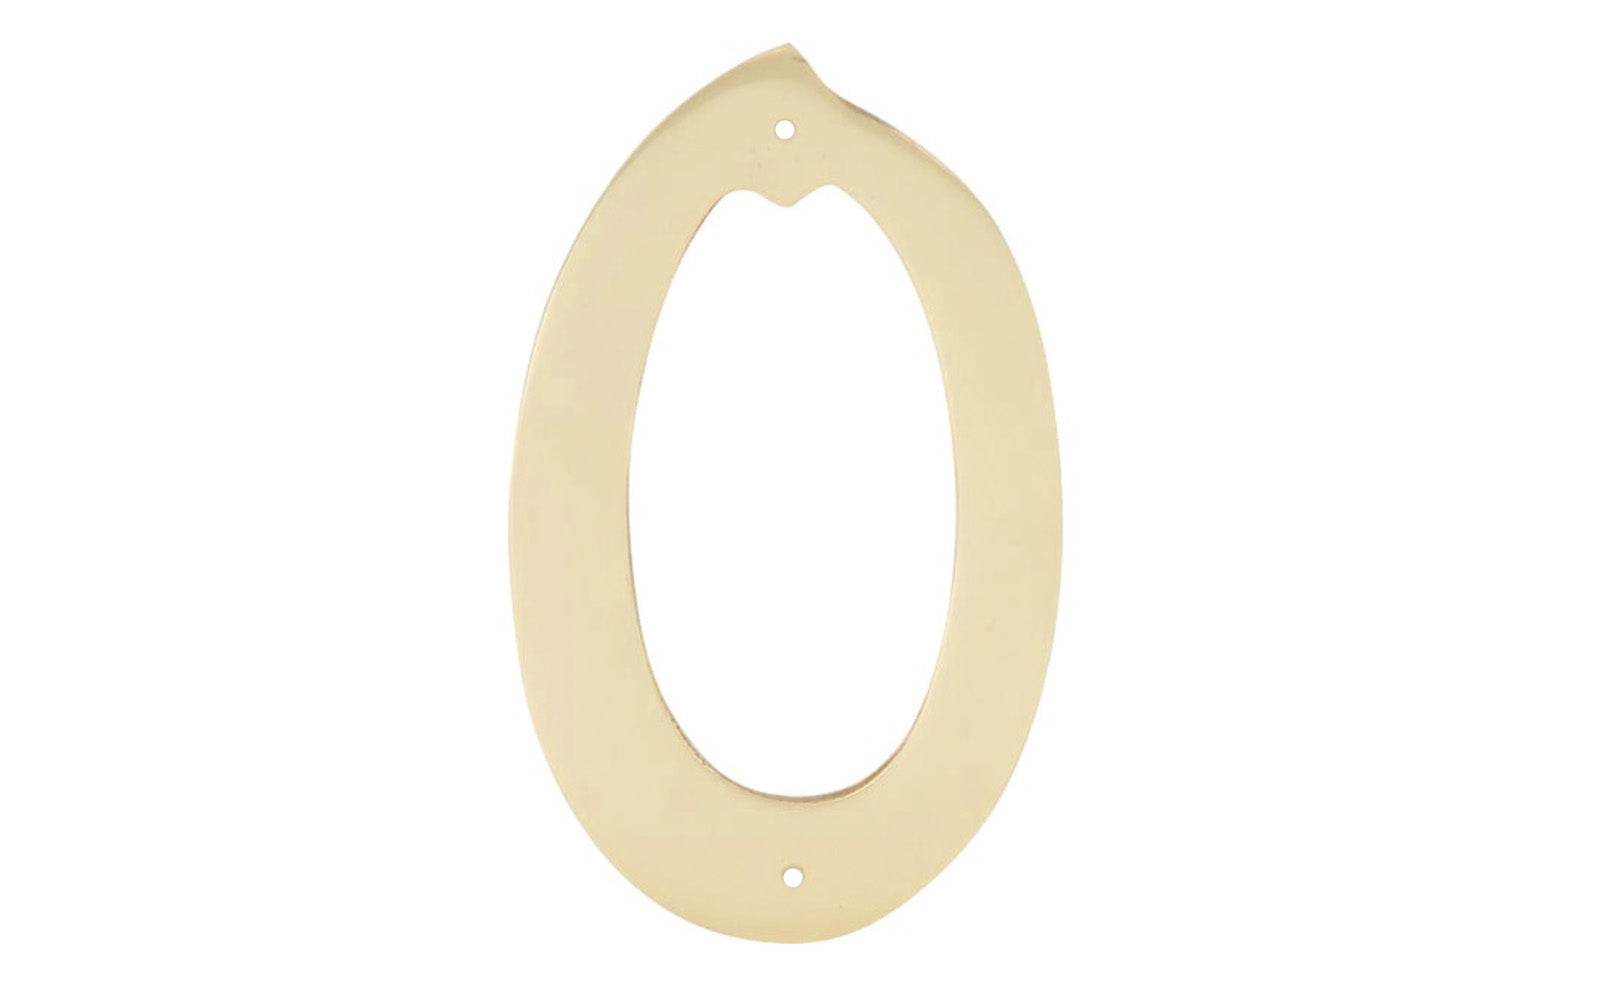 Number Zero Soild Brass House Number in a 4" Size. Made of solid brass material - 1/16" thickness. Lacquered brass finish. Mounting nails included. #0 House Number. Hy-Ko Model No. BR-40/0. 029069200909